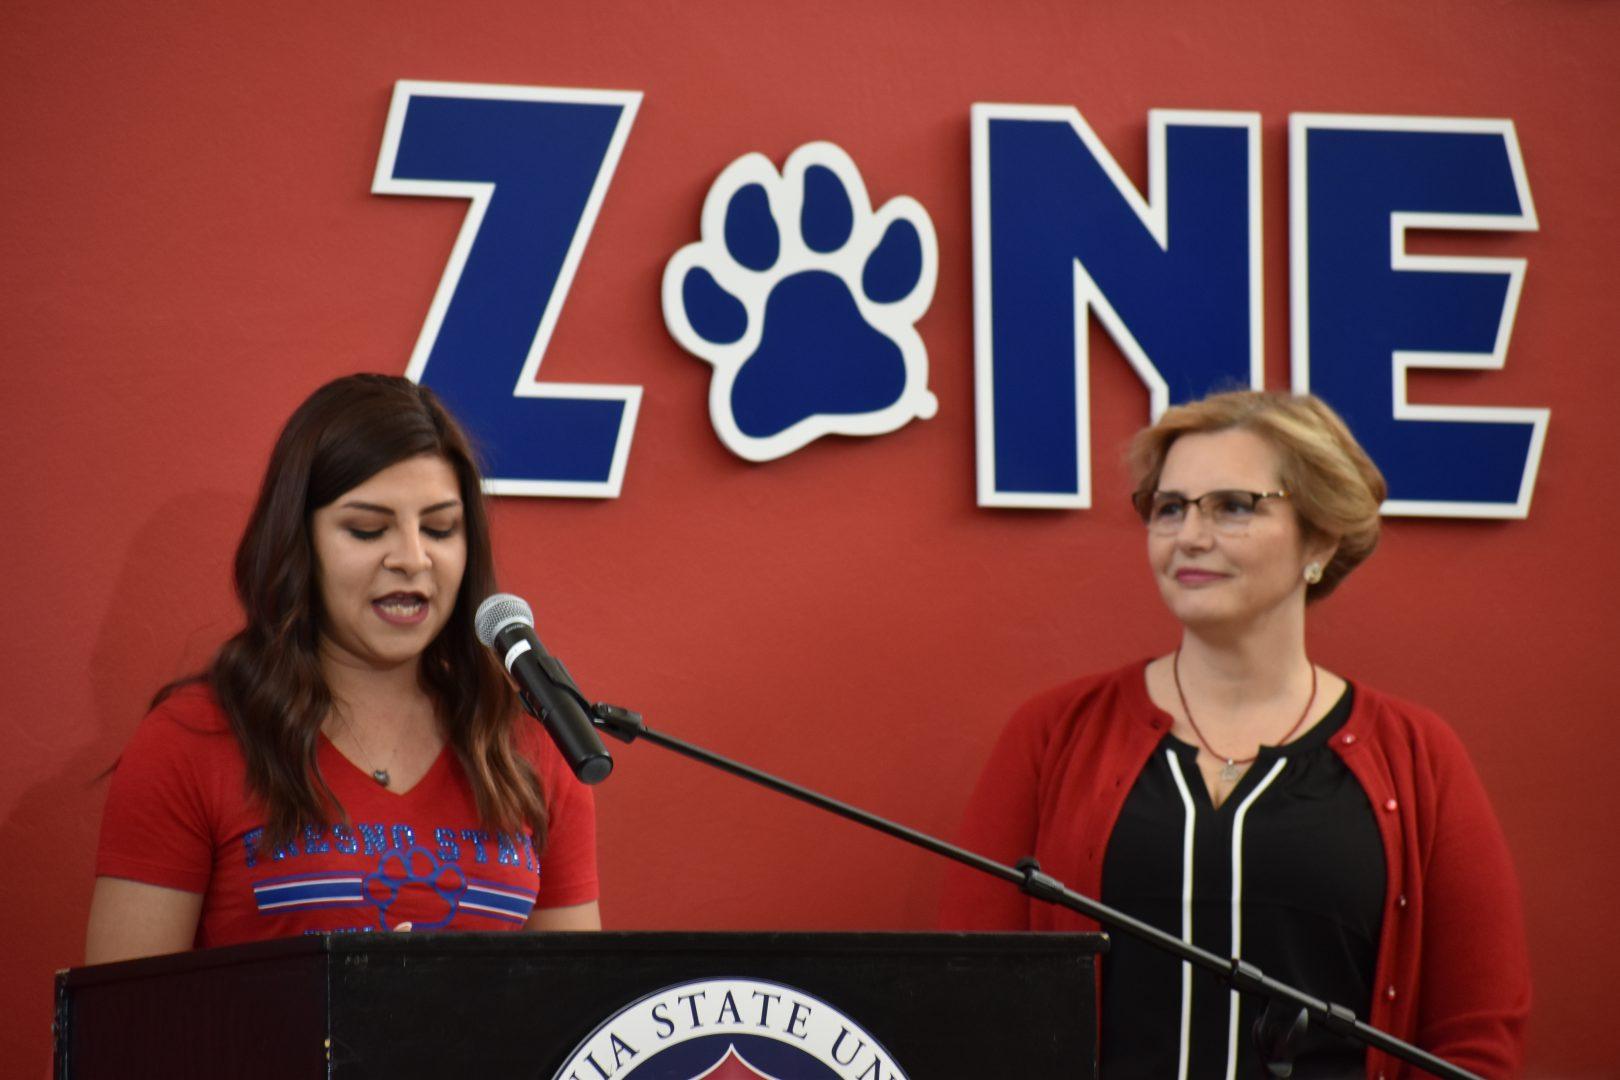 ToniMarie Munoz (left), a Fresno State senior, speaks about how she has benefited from the Student Cupboard as Fresno States first lady Mary Castro (right) looks on at the March Match Up result unveiling on April 5, 2019. (Payton Hartung/The Collegian)